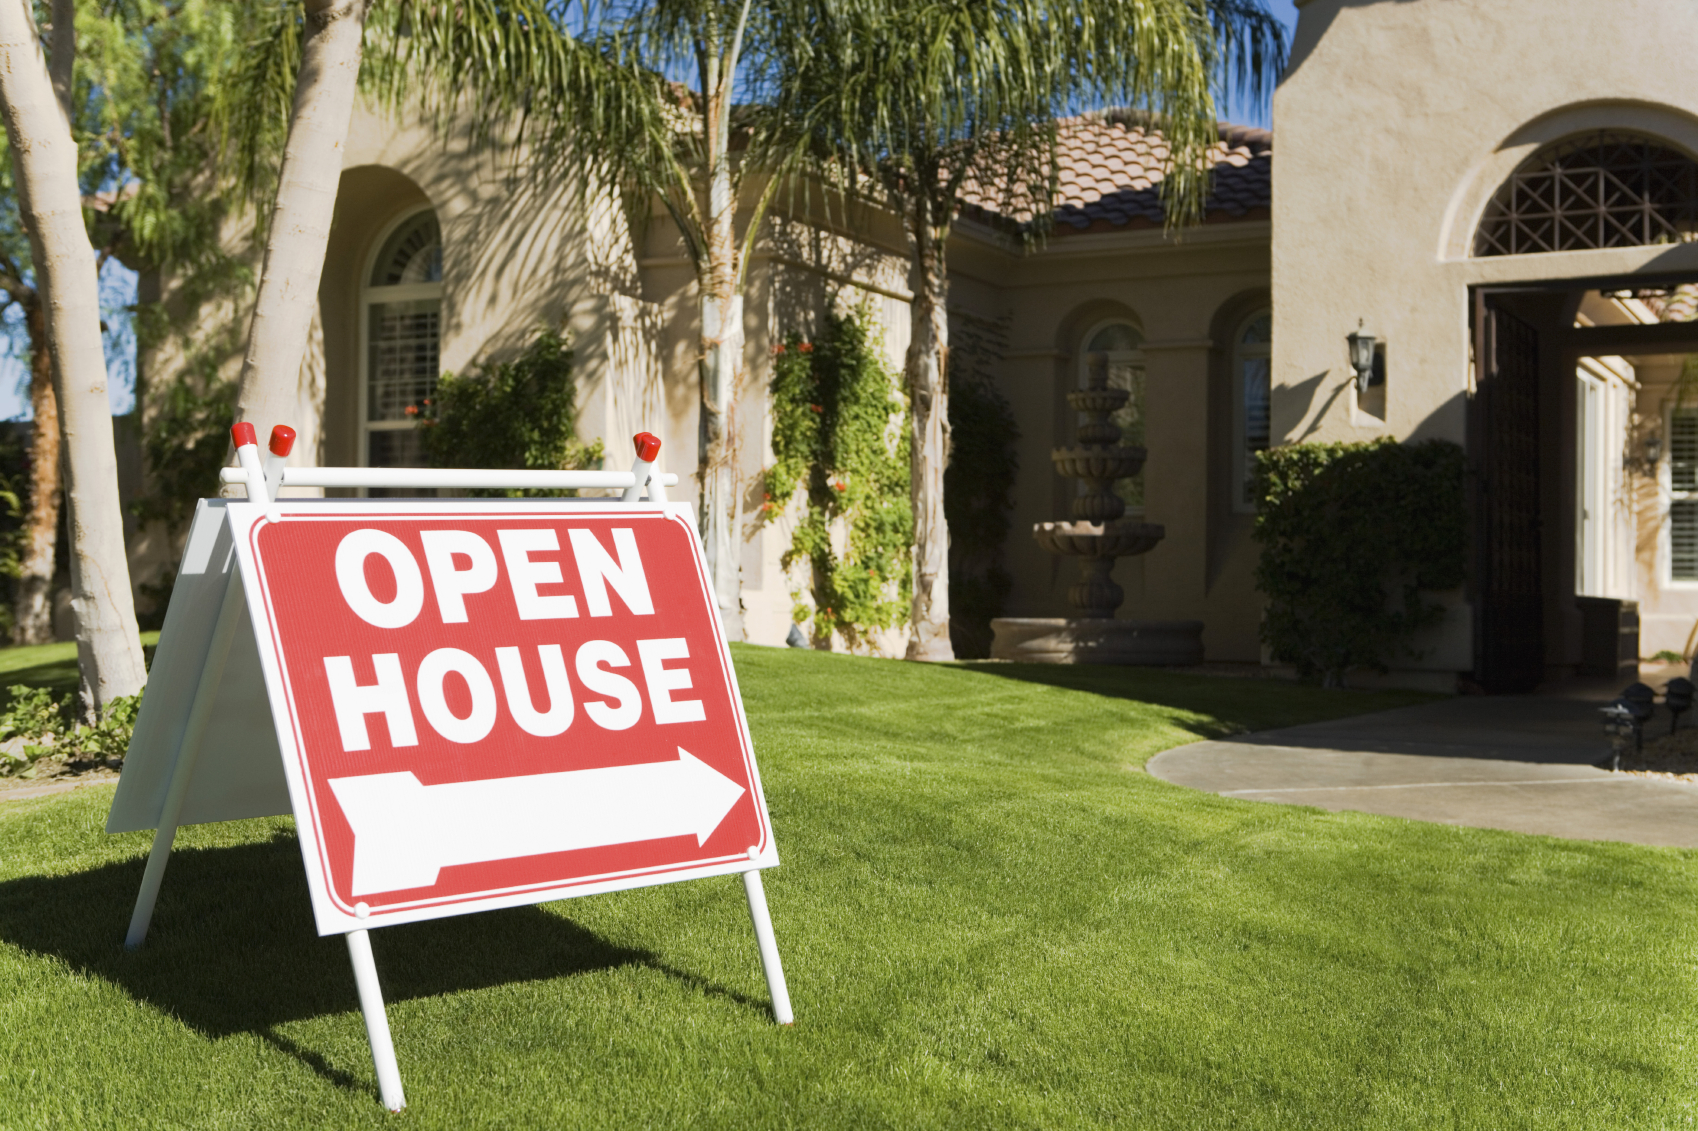 How To Host An Open House - The Right Wans